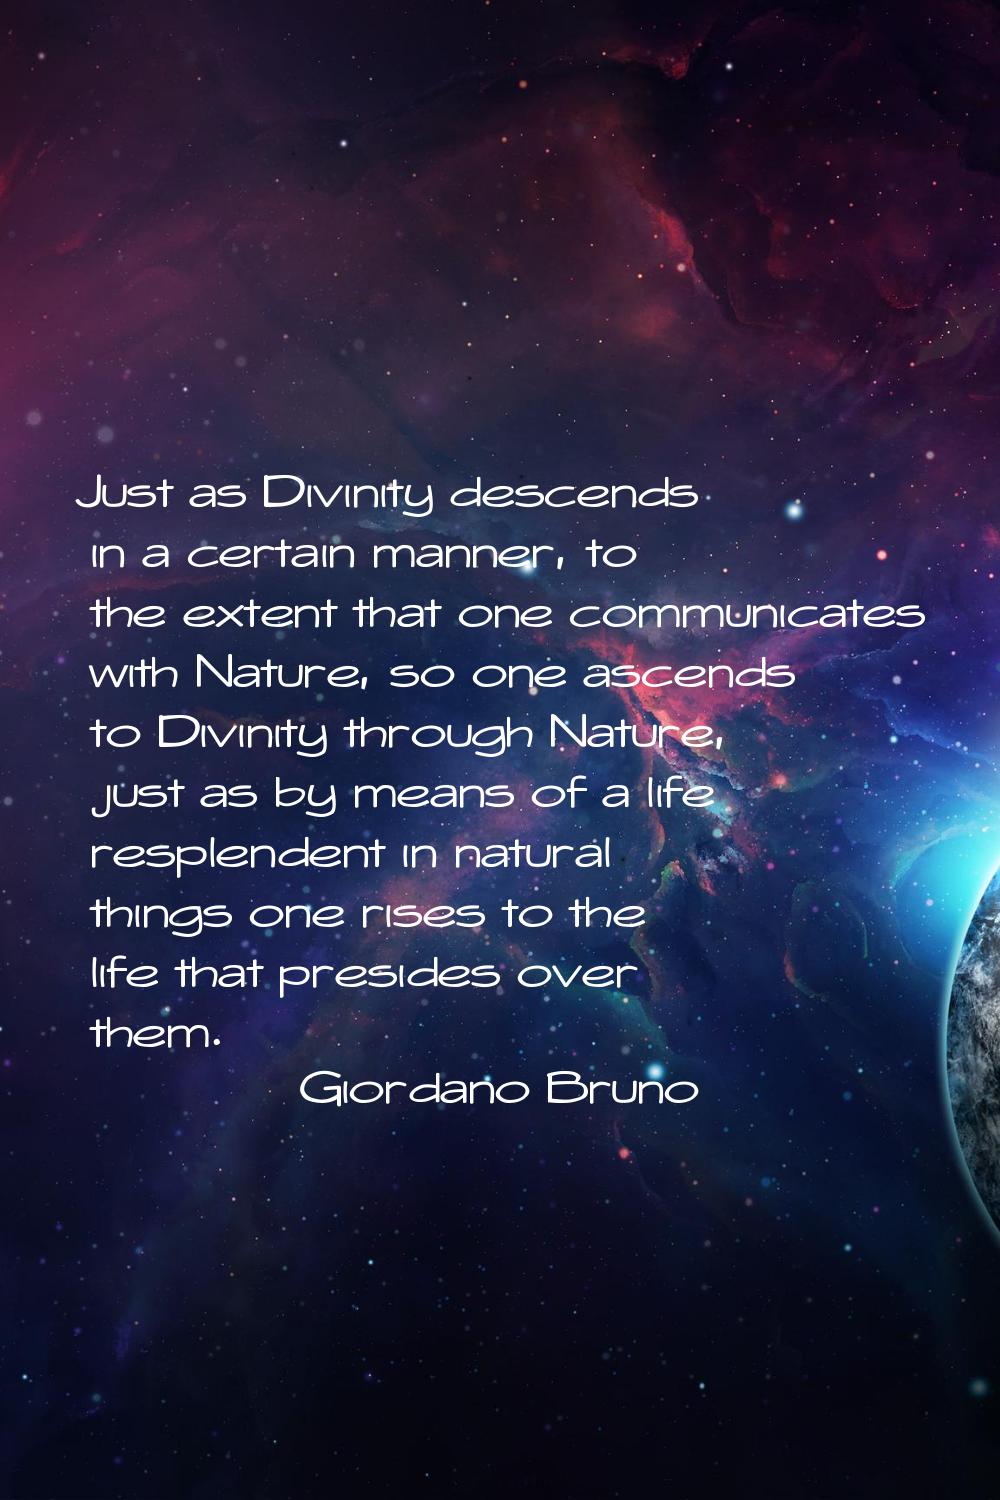 Just as Divinity descends in a certain manner, to the extent that one communicates with Nature, so 